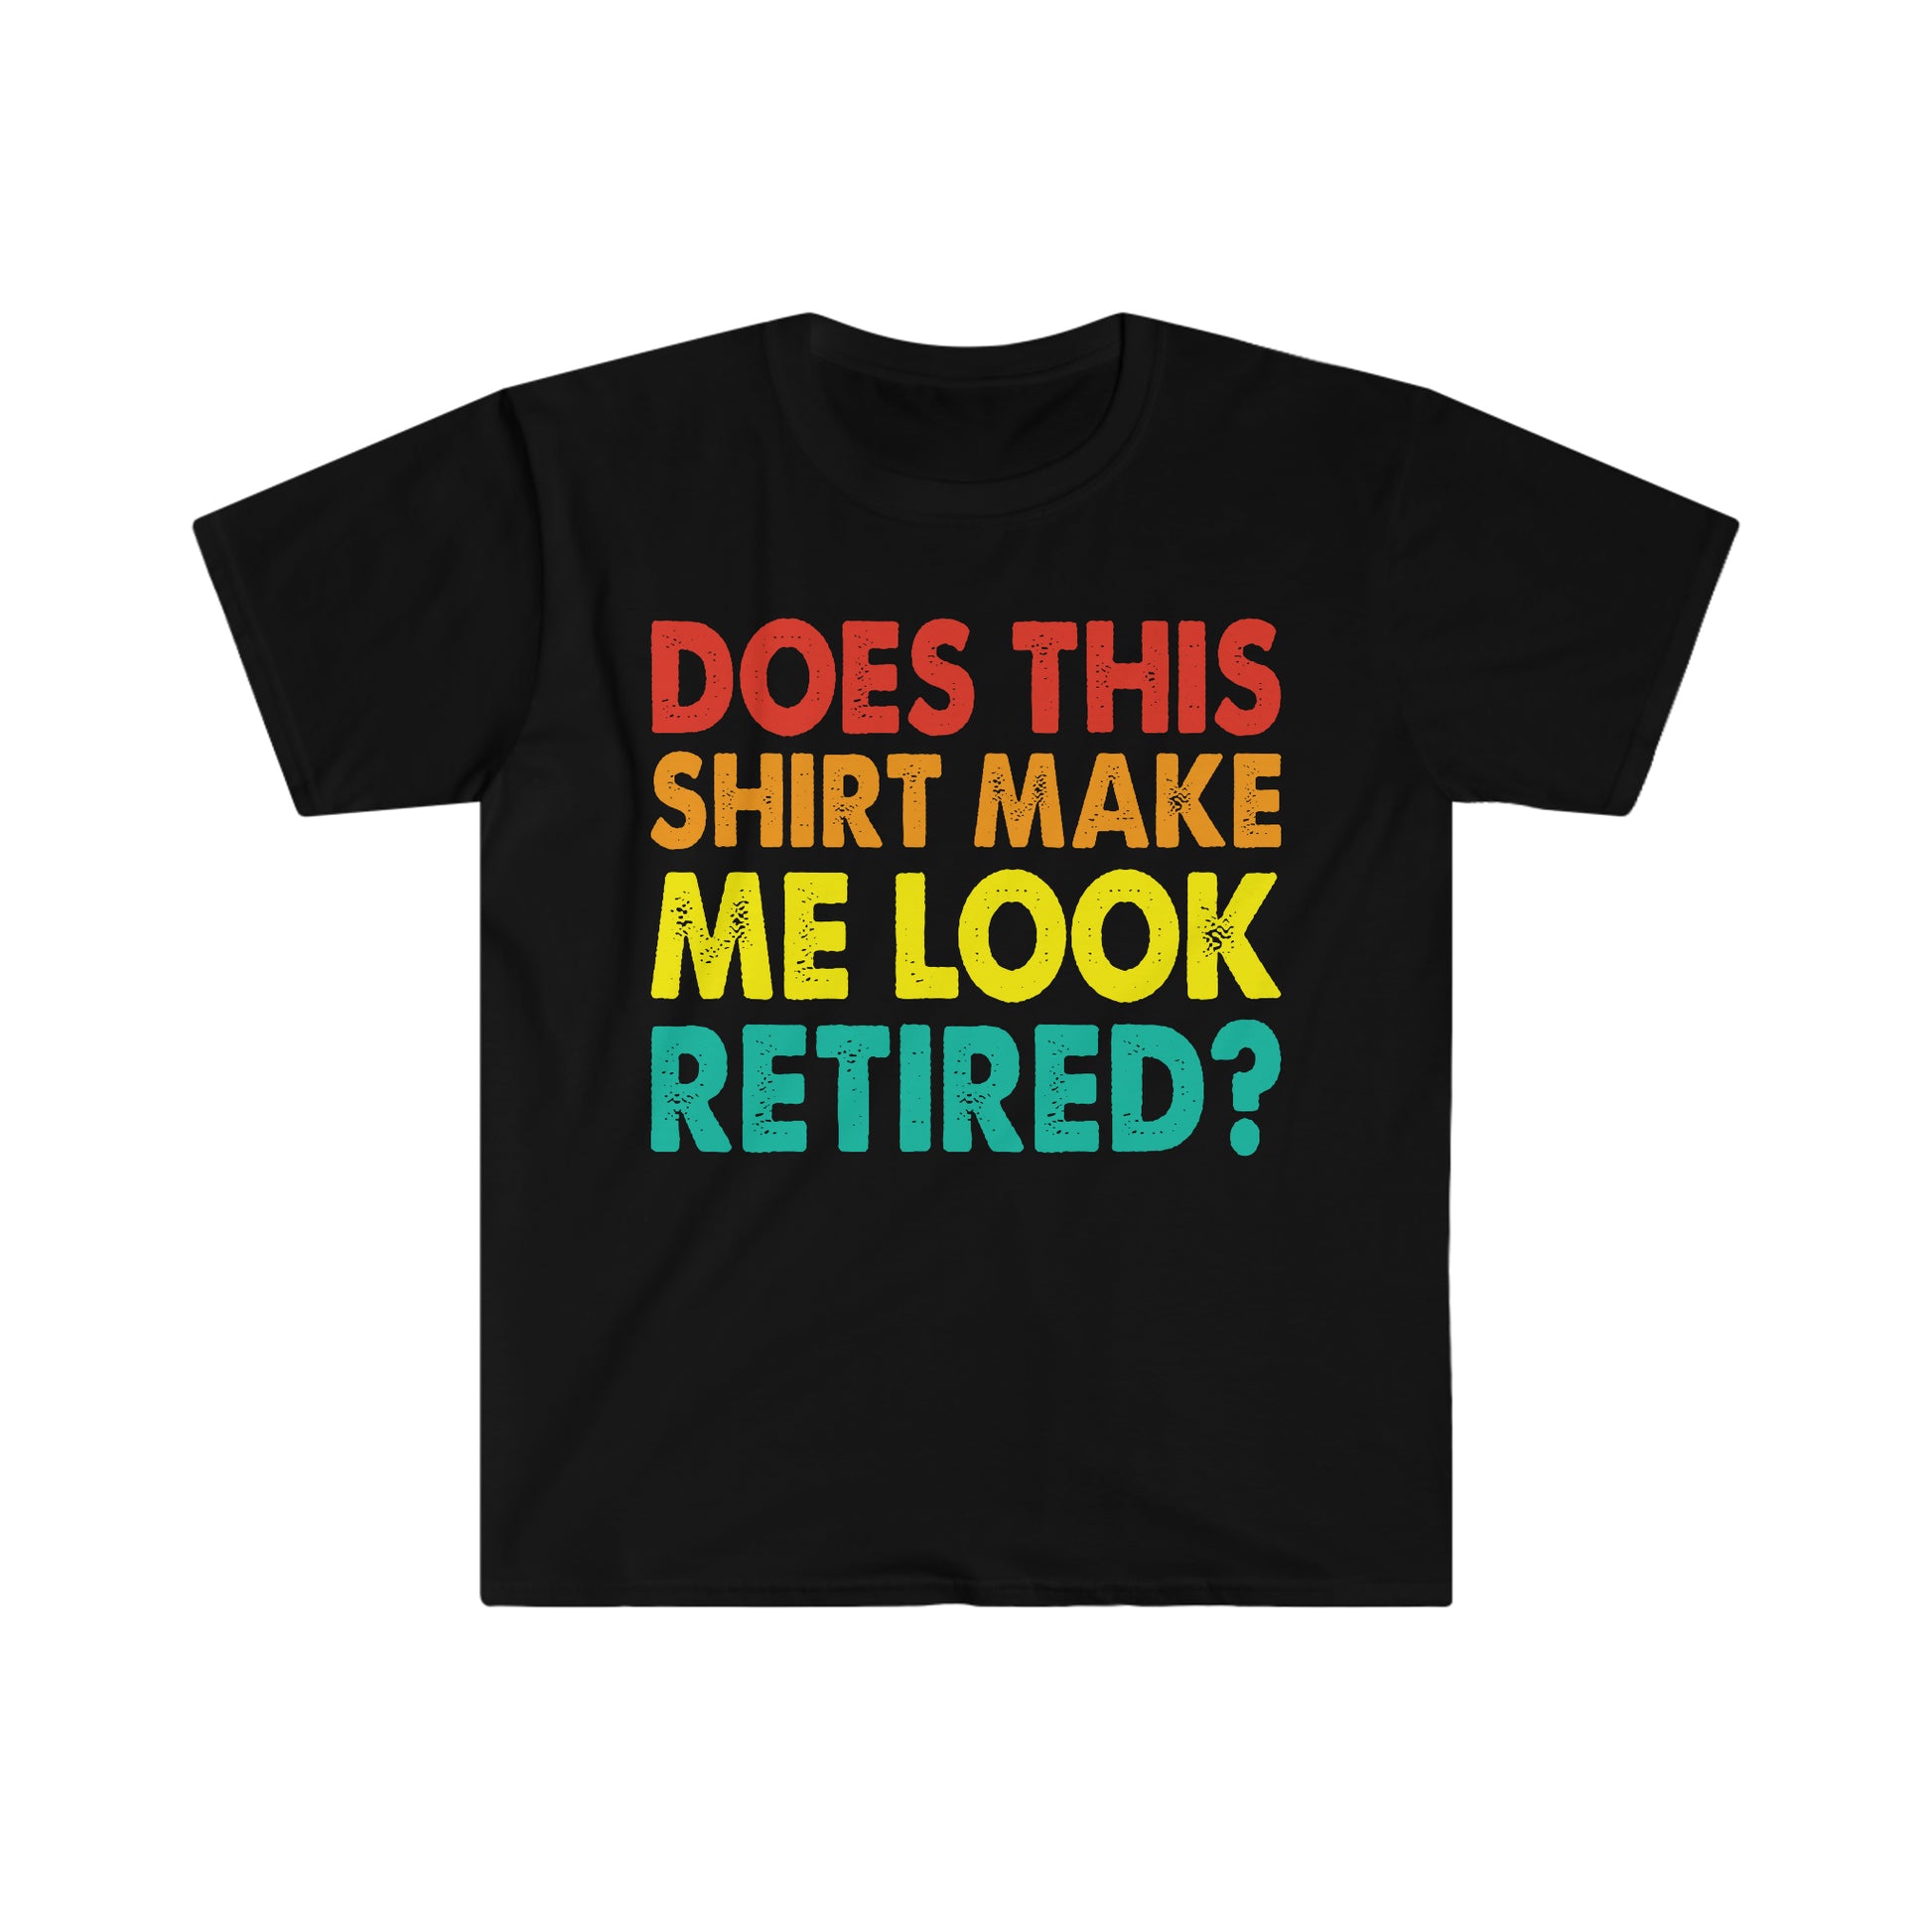 Does this Shirt Make me Look Retired, Funny Retirement Shirt